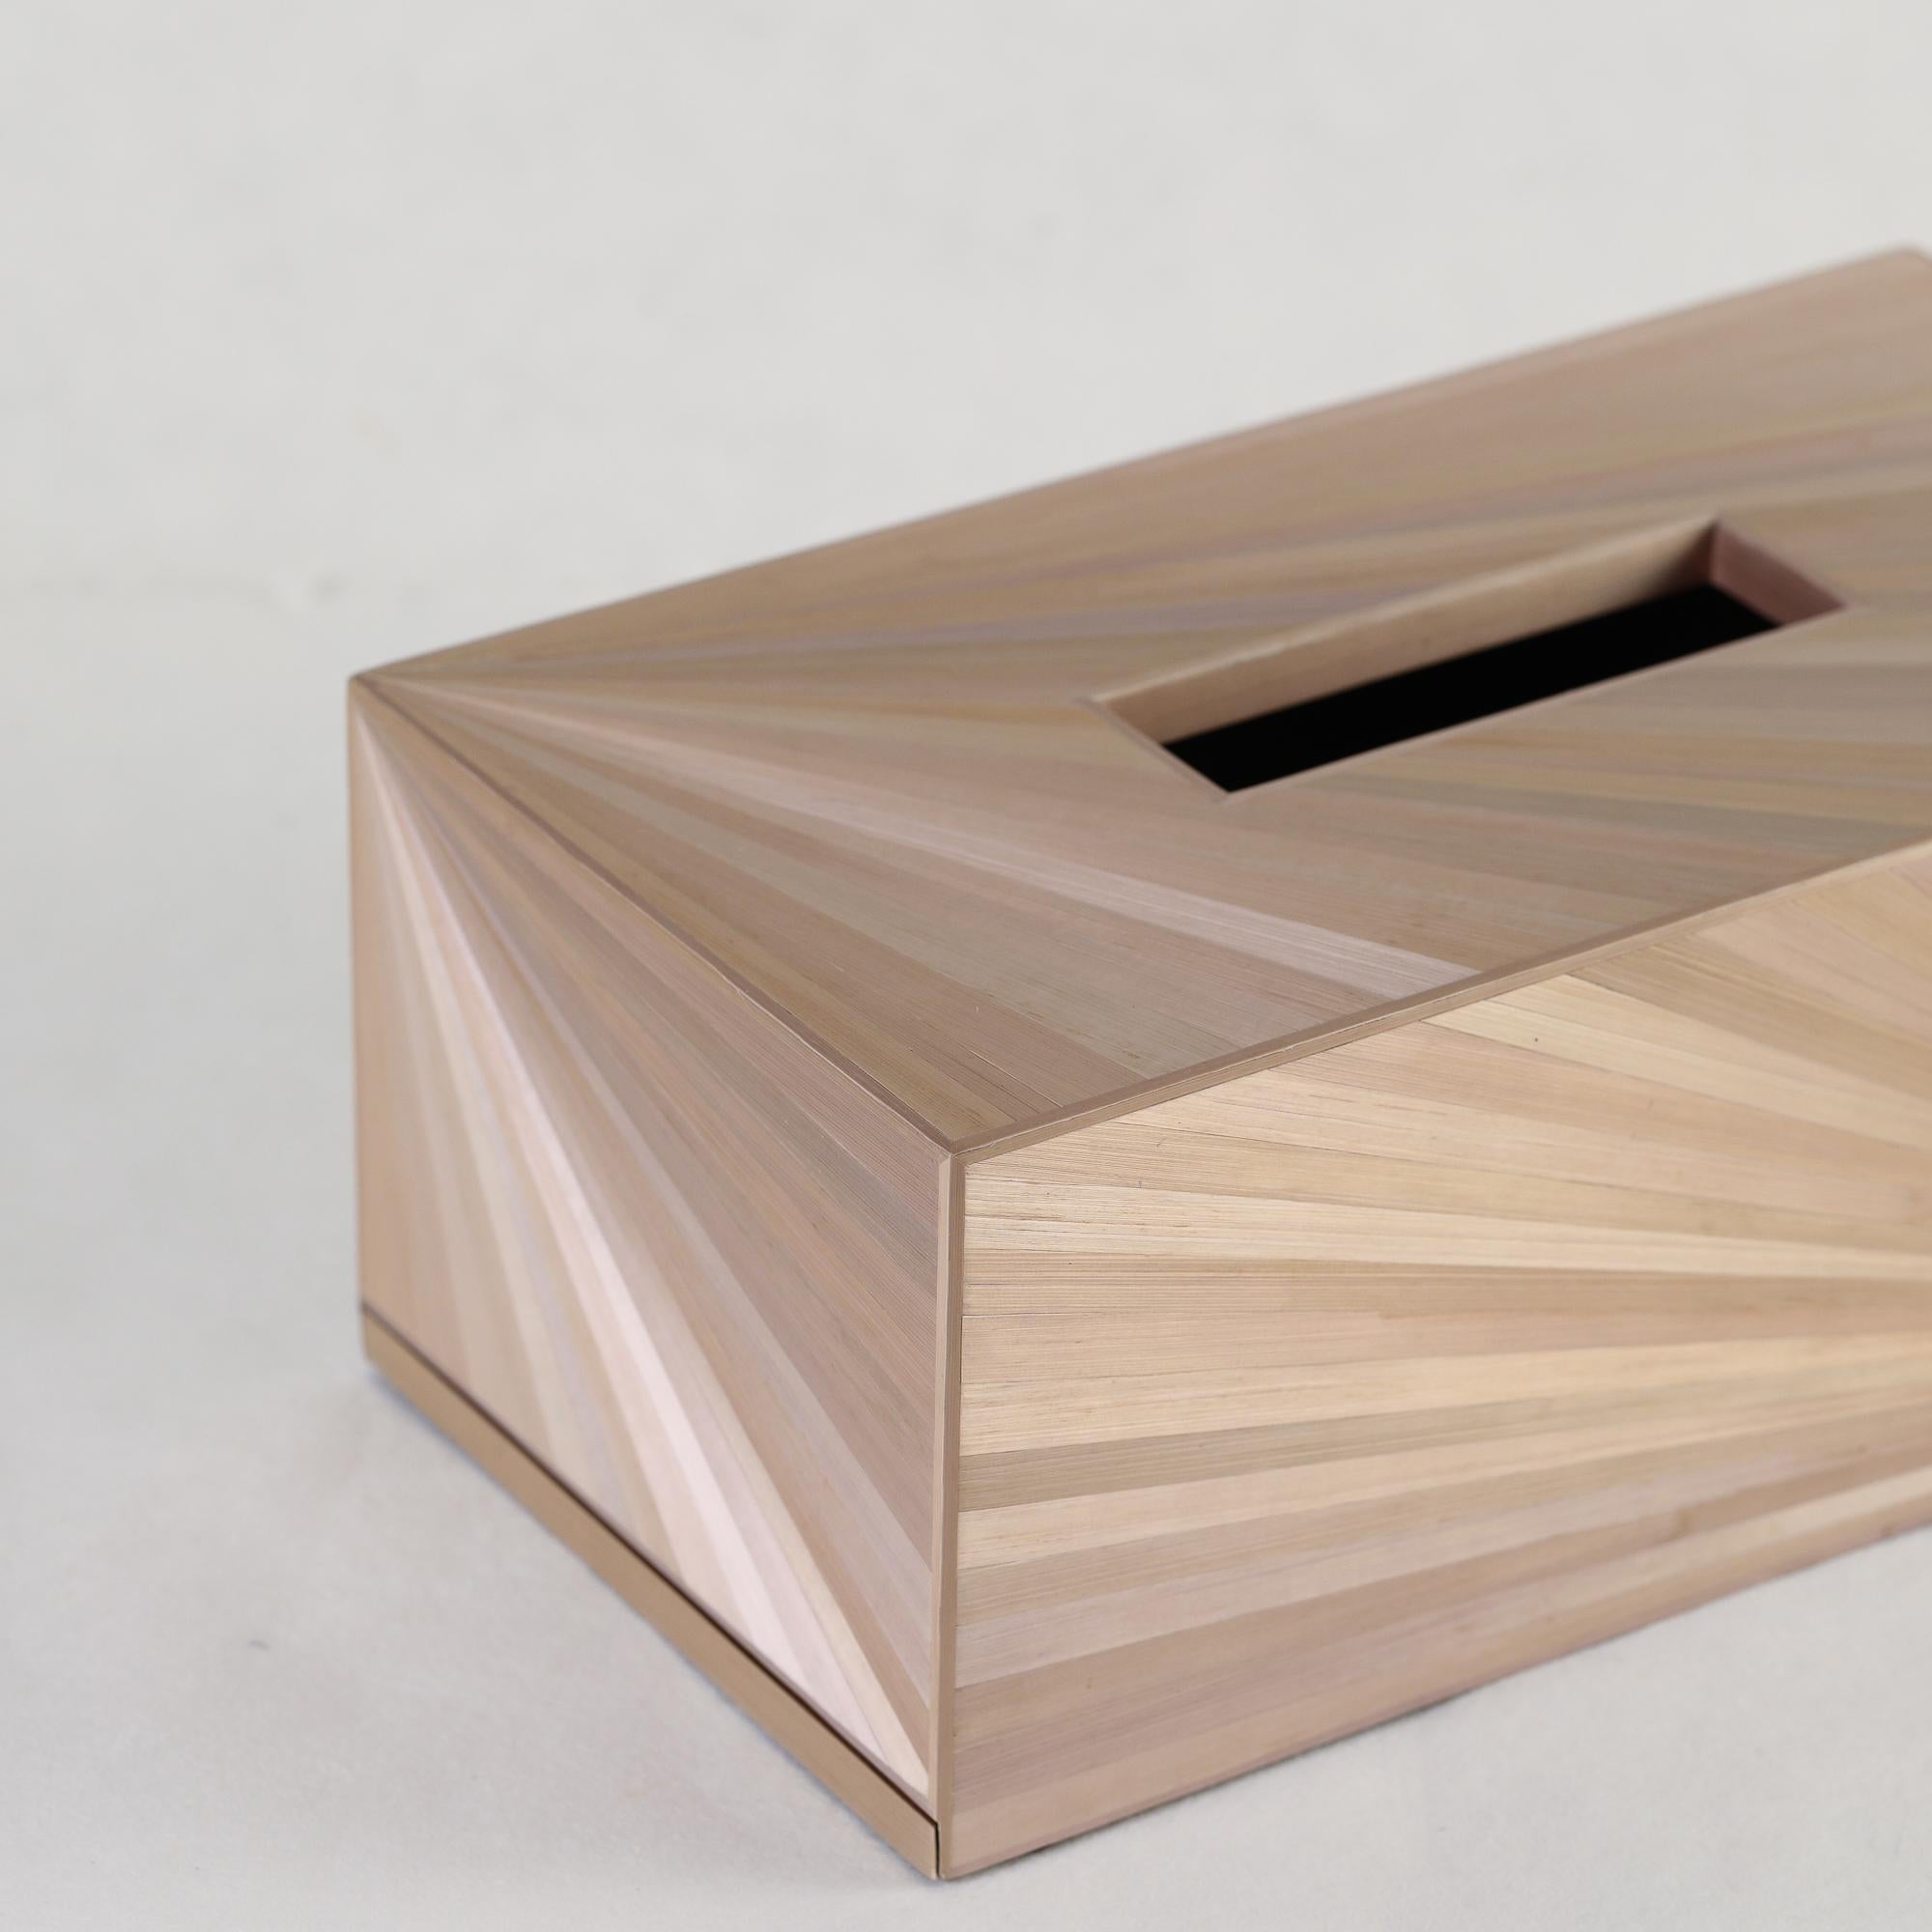 Thai Straw Marquetry Soleil Tissue Box in Burnished Metals Colour by Alexander Lamont